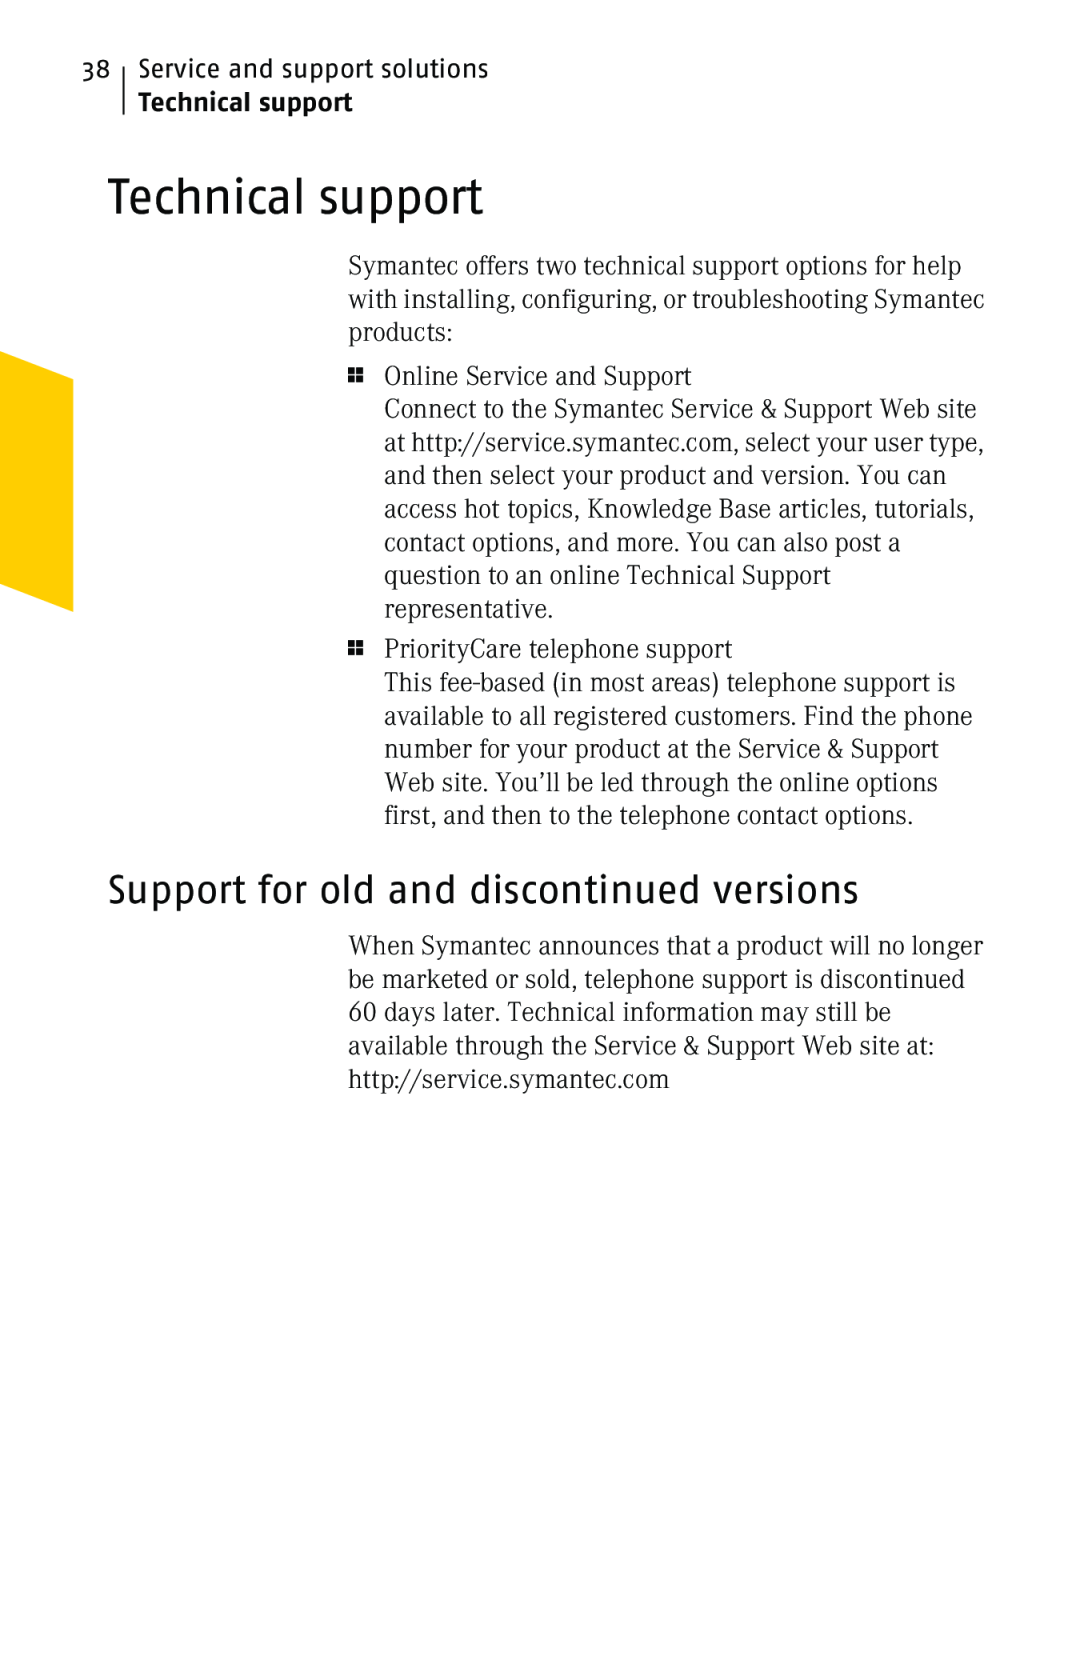 Symantec 10 manual Technical support, Support for old and discontinued versions 